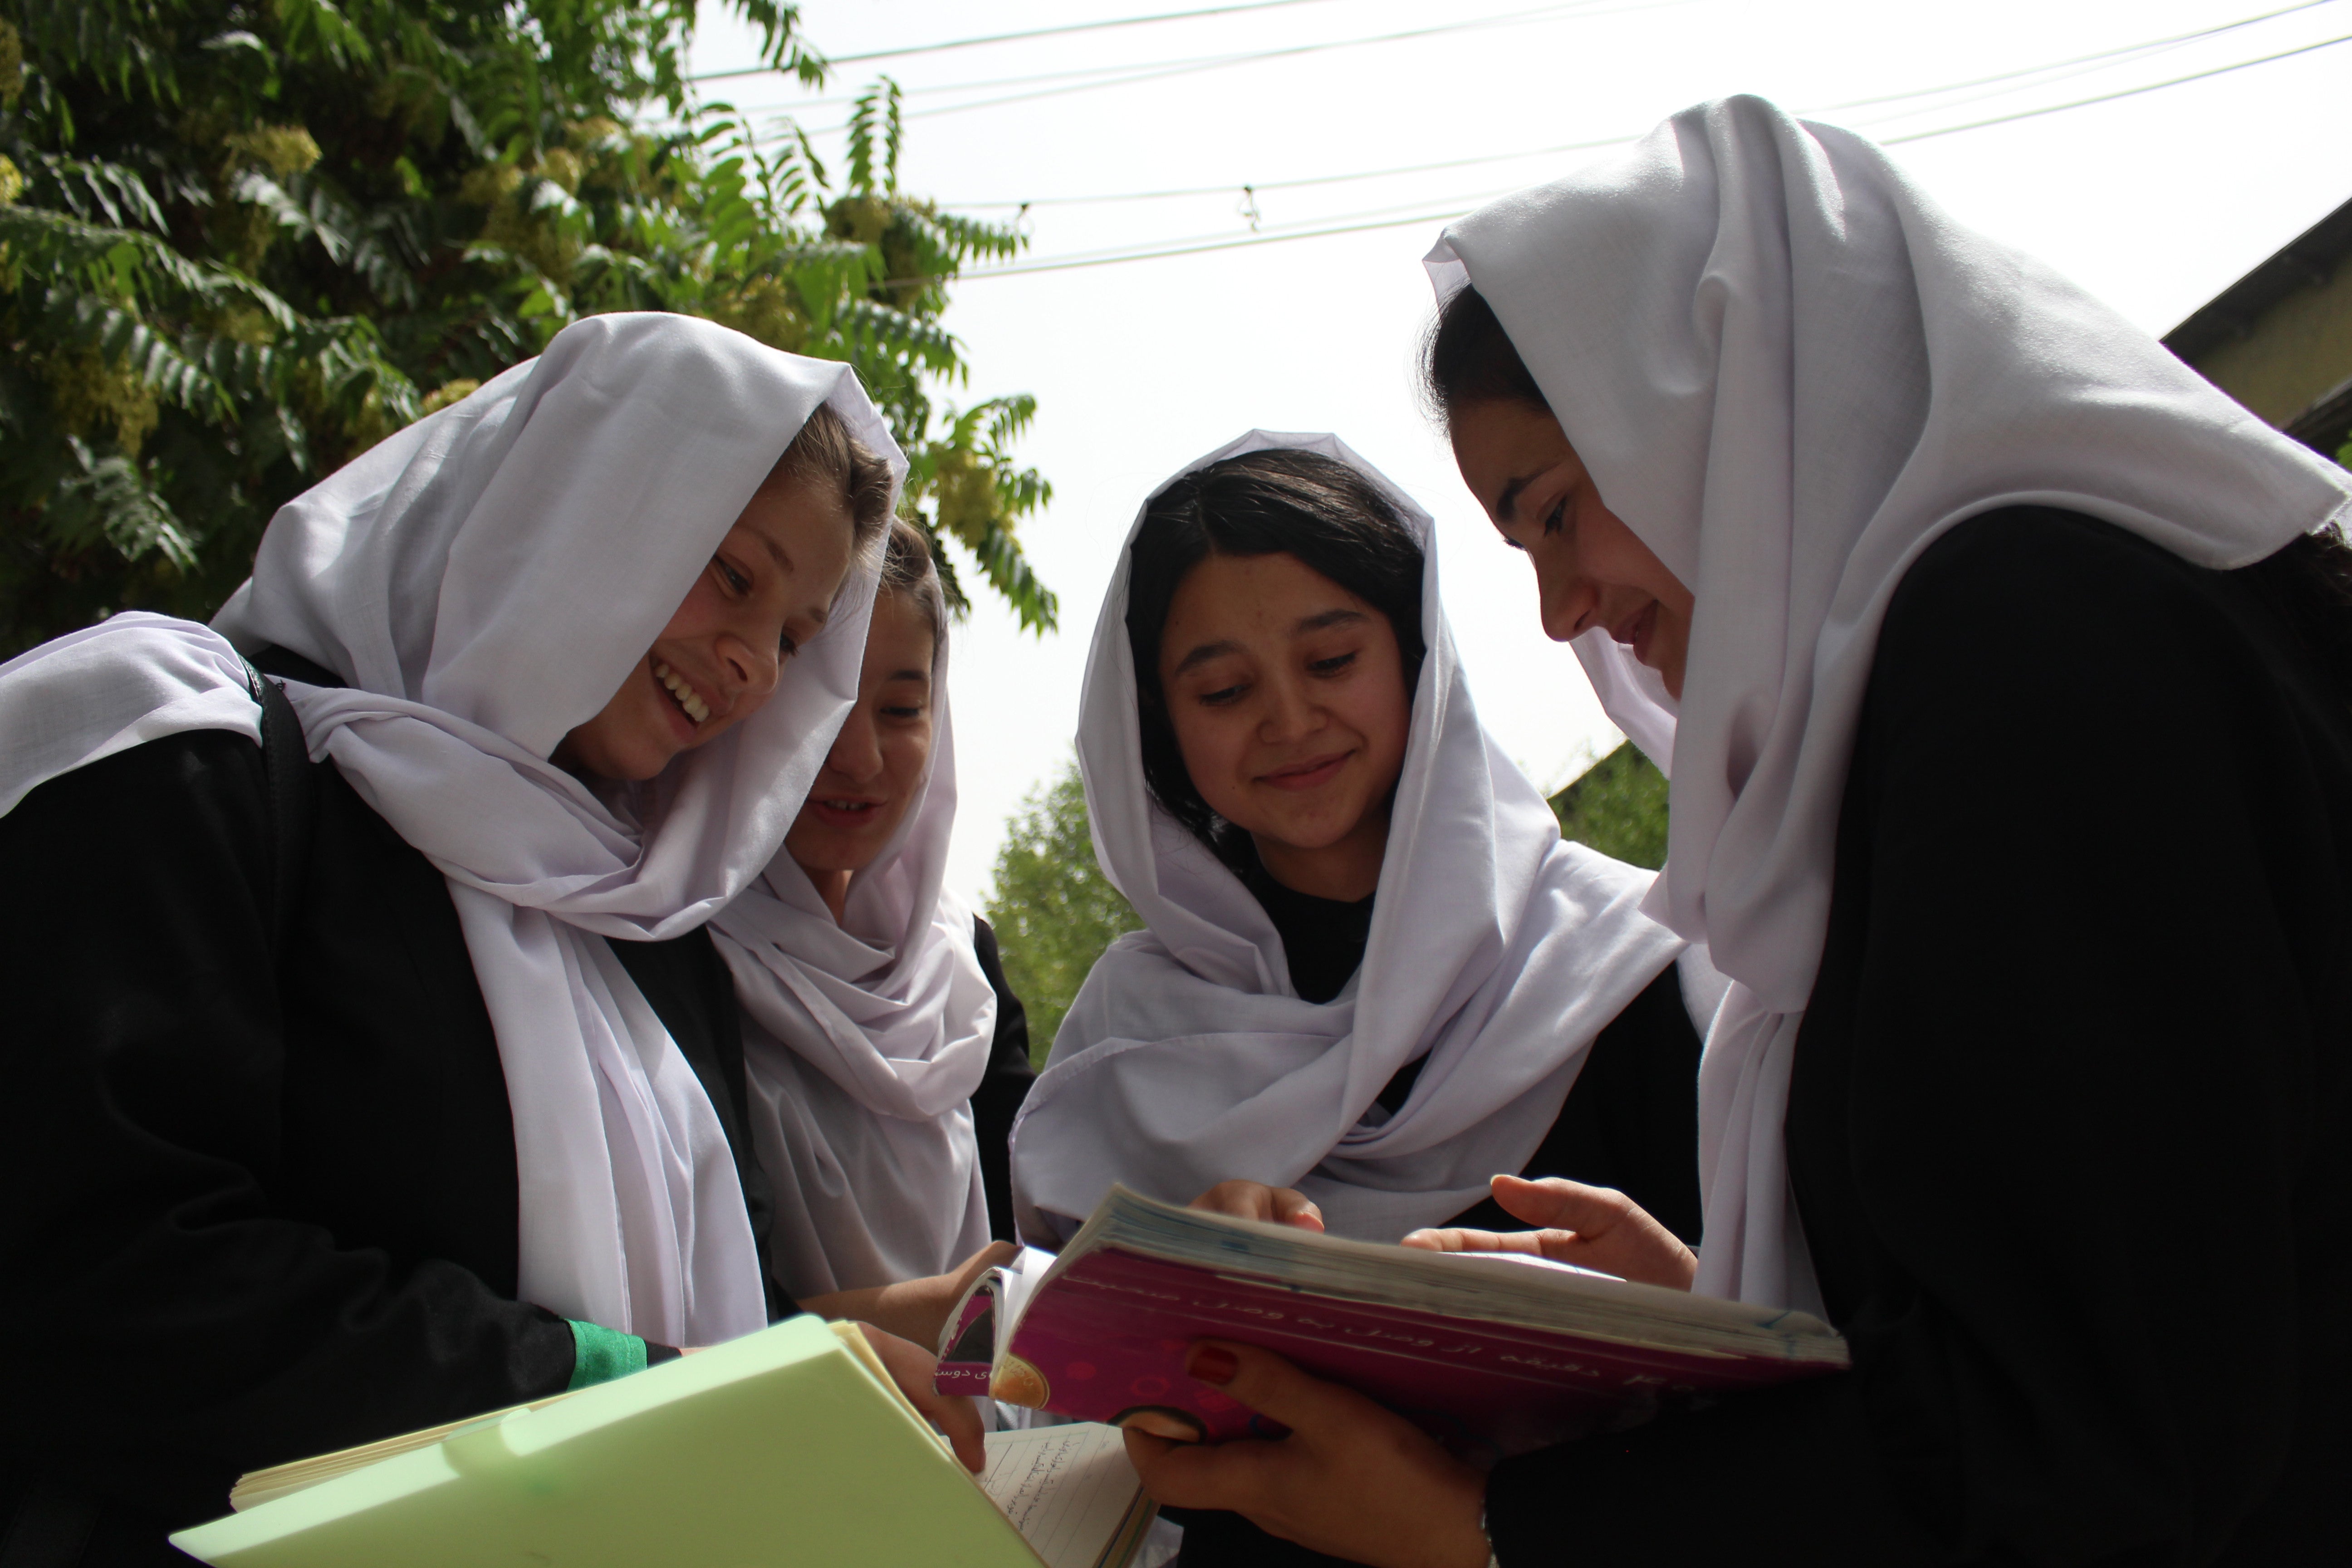 <p>Members of the Best Friends Group at Zarghoona High School, from left: Belqees Niazi, 17, Behishta Amini, 18, and Safia Hussain, also 18, with an unidentified girl second from left</p>